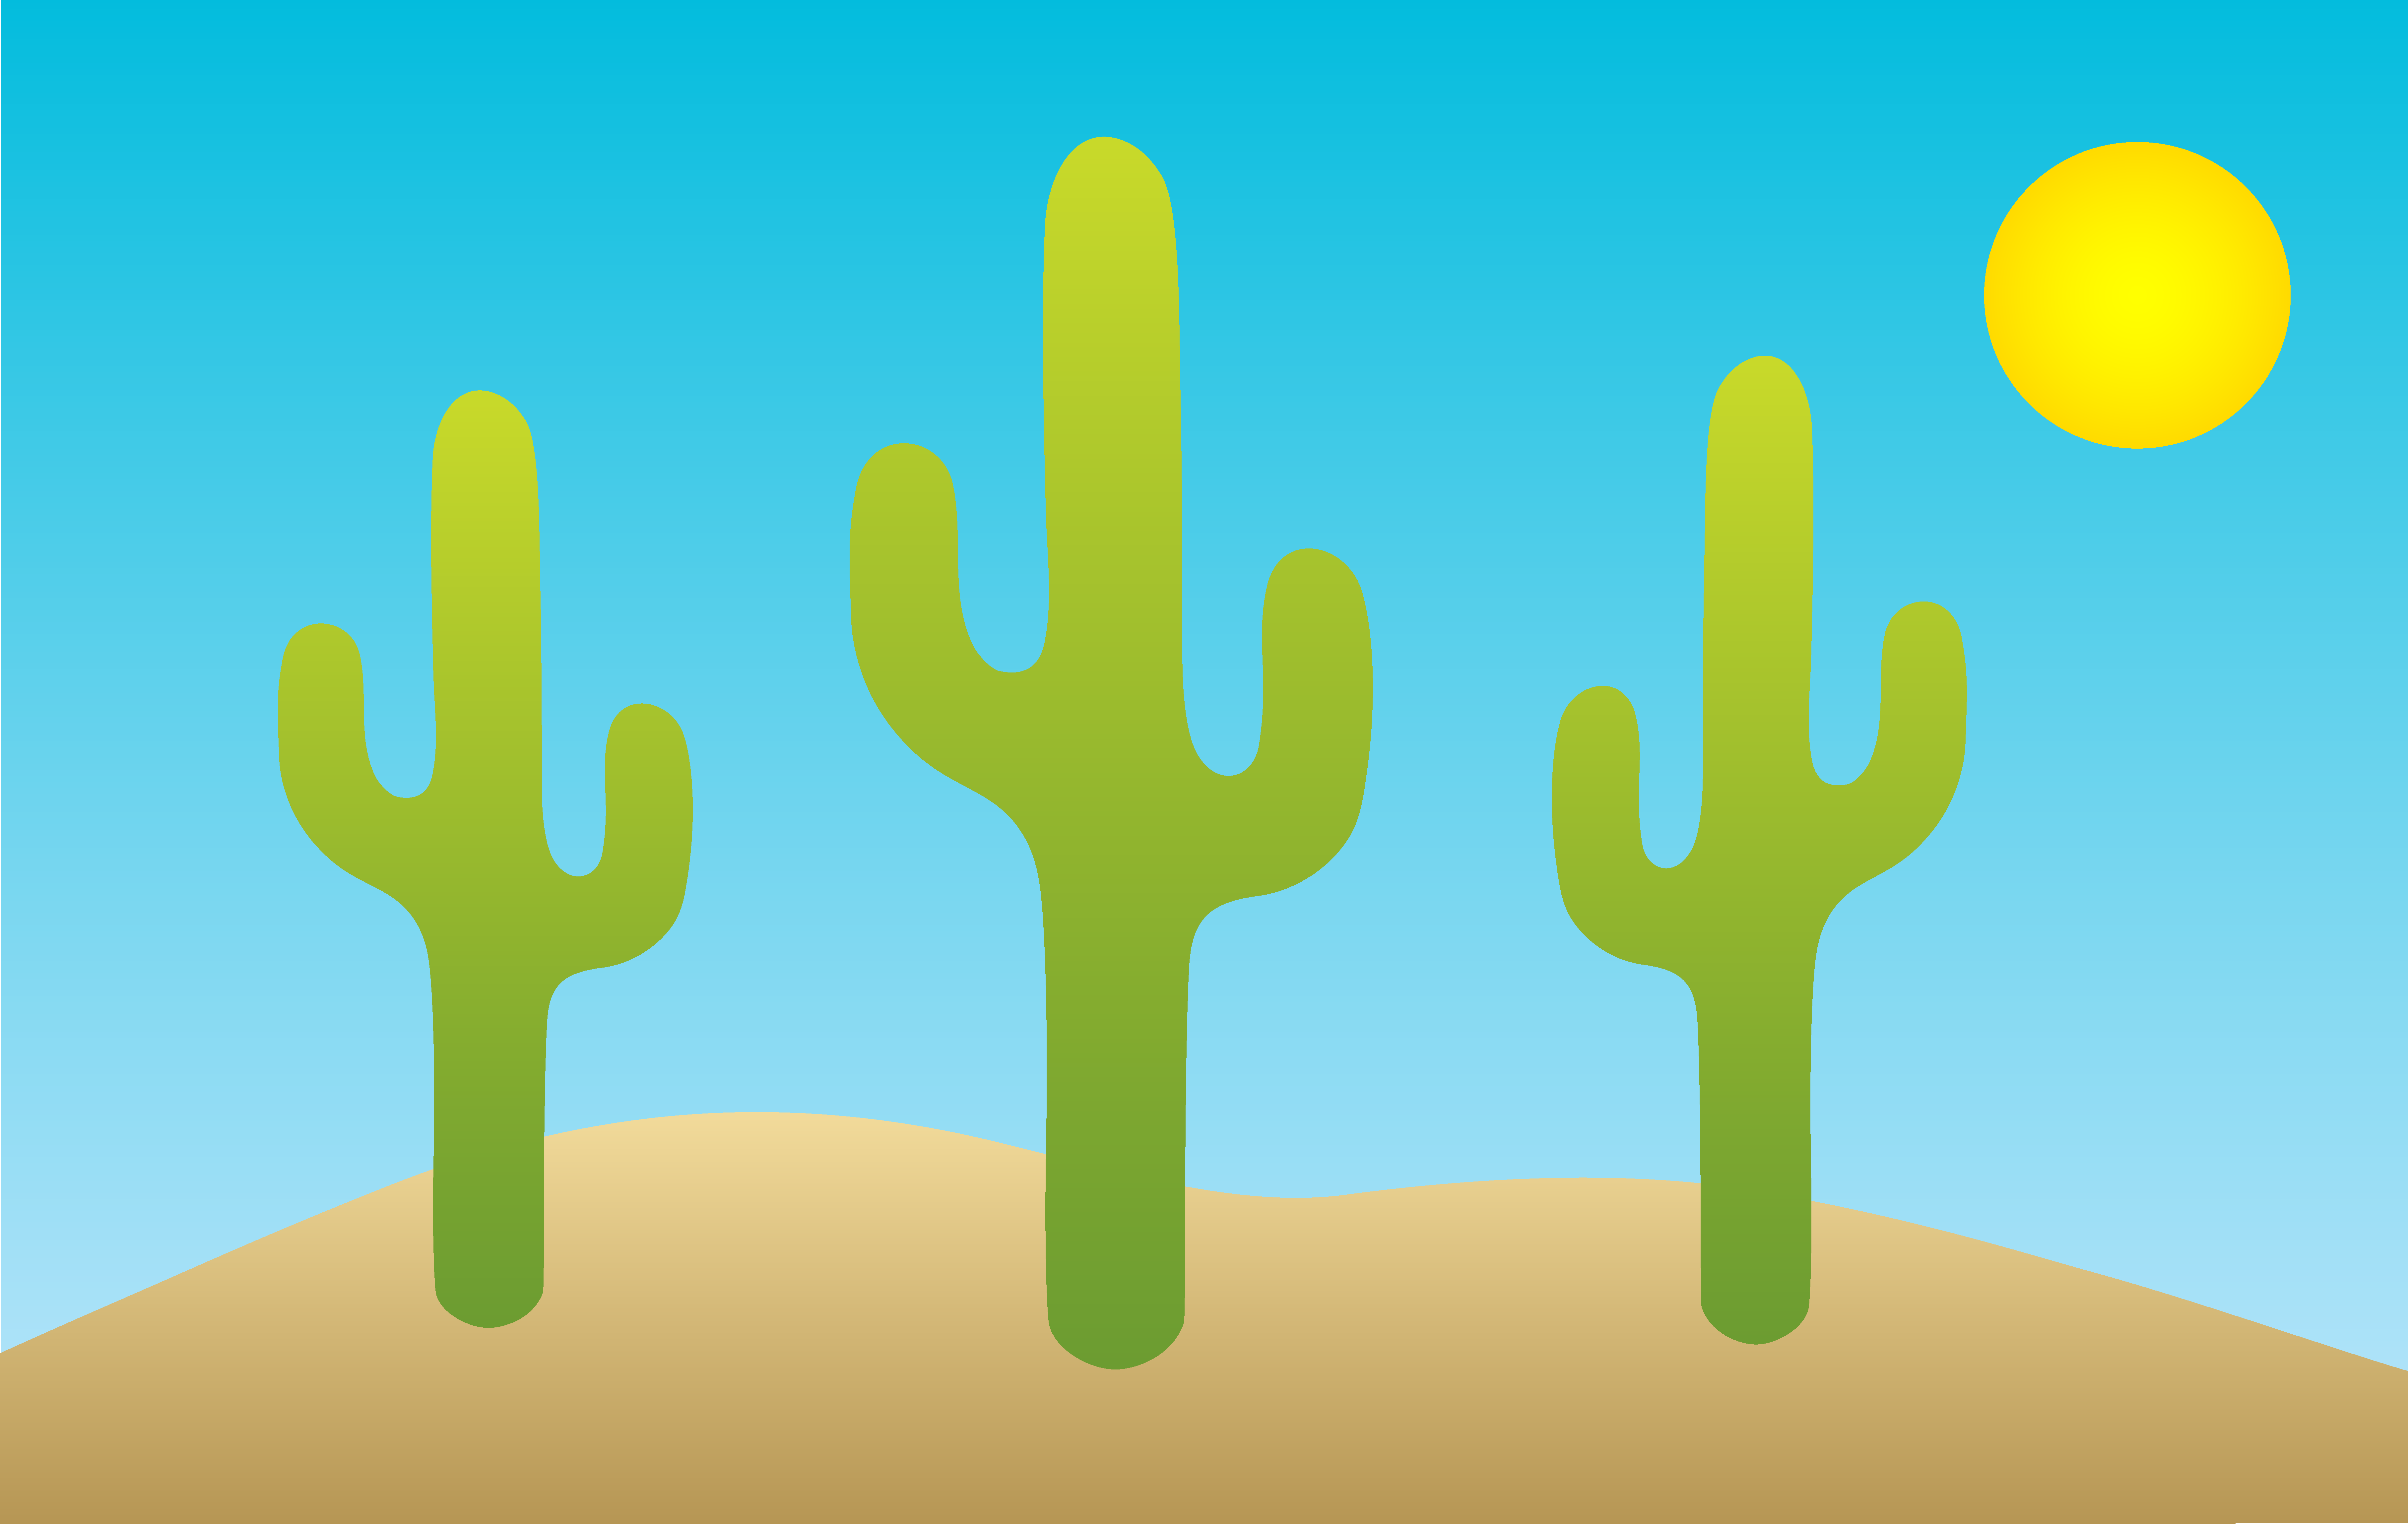 Free Cactus Silhouette Clip Art, Download Free Cactus Silhouette Clip ...